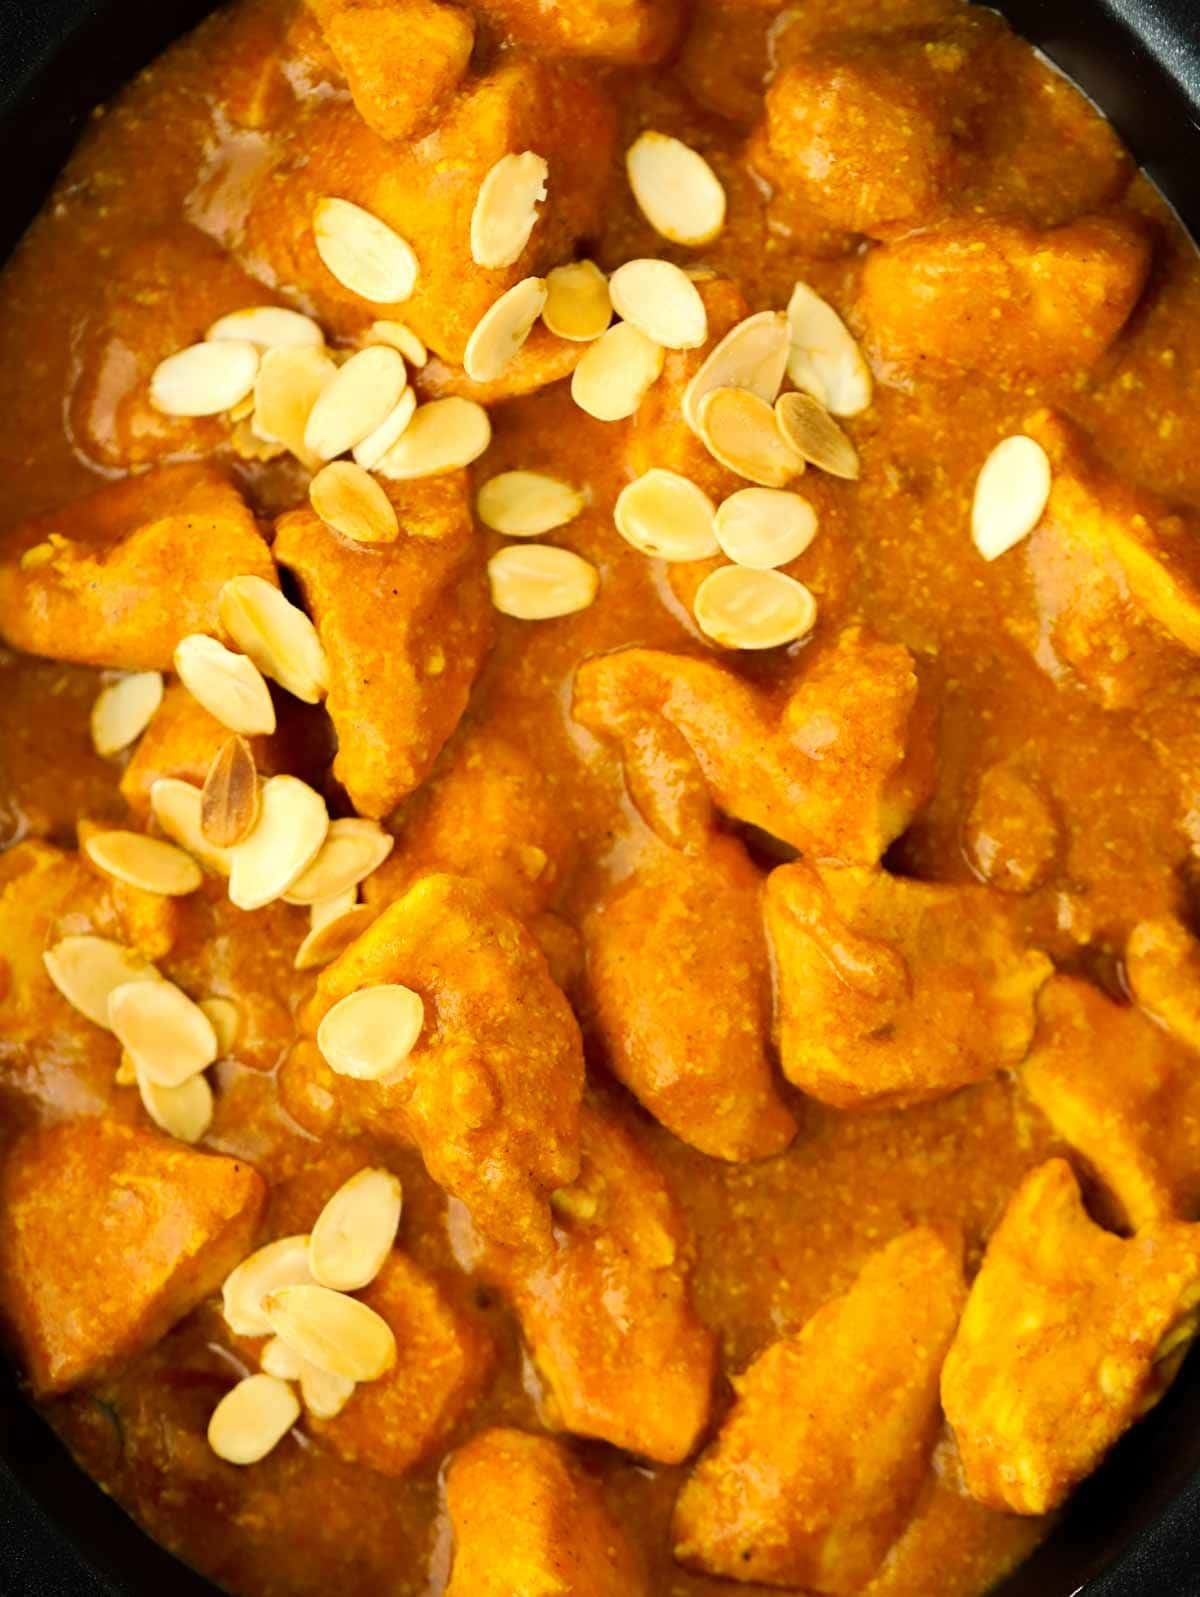 A close up of chicken pieces in a korma curry sauce, topped with almond flakes.